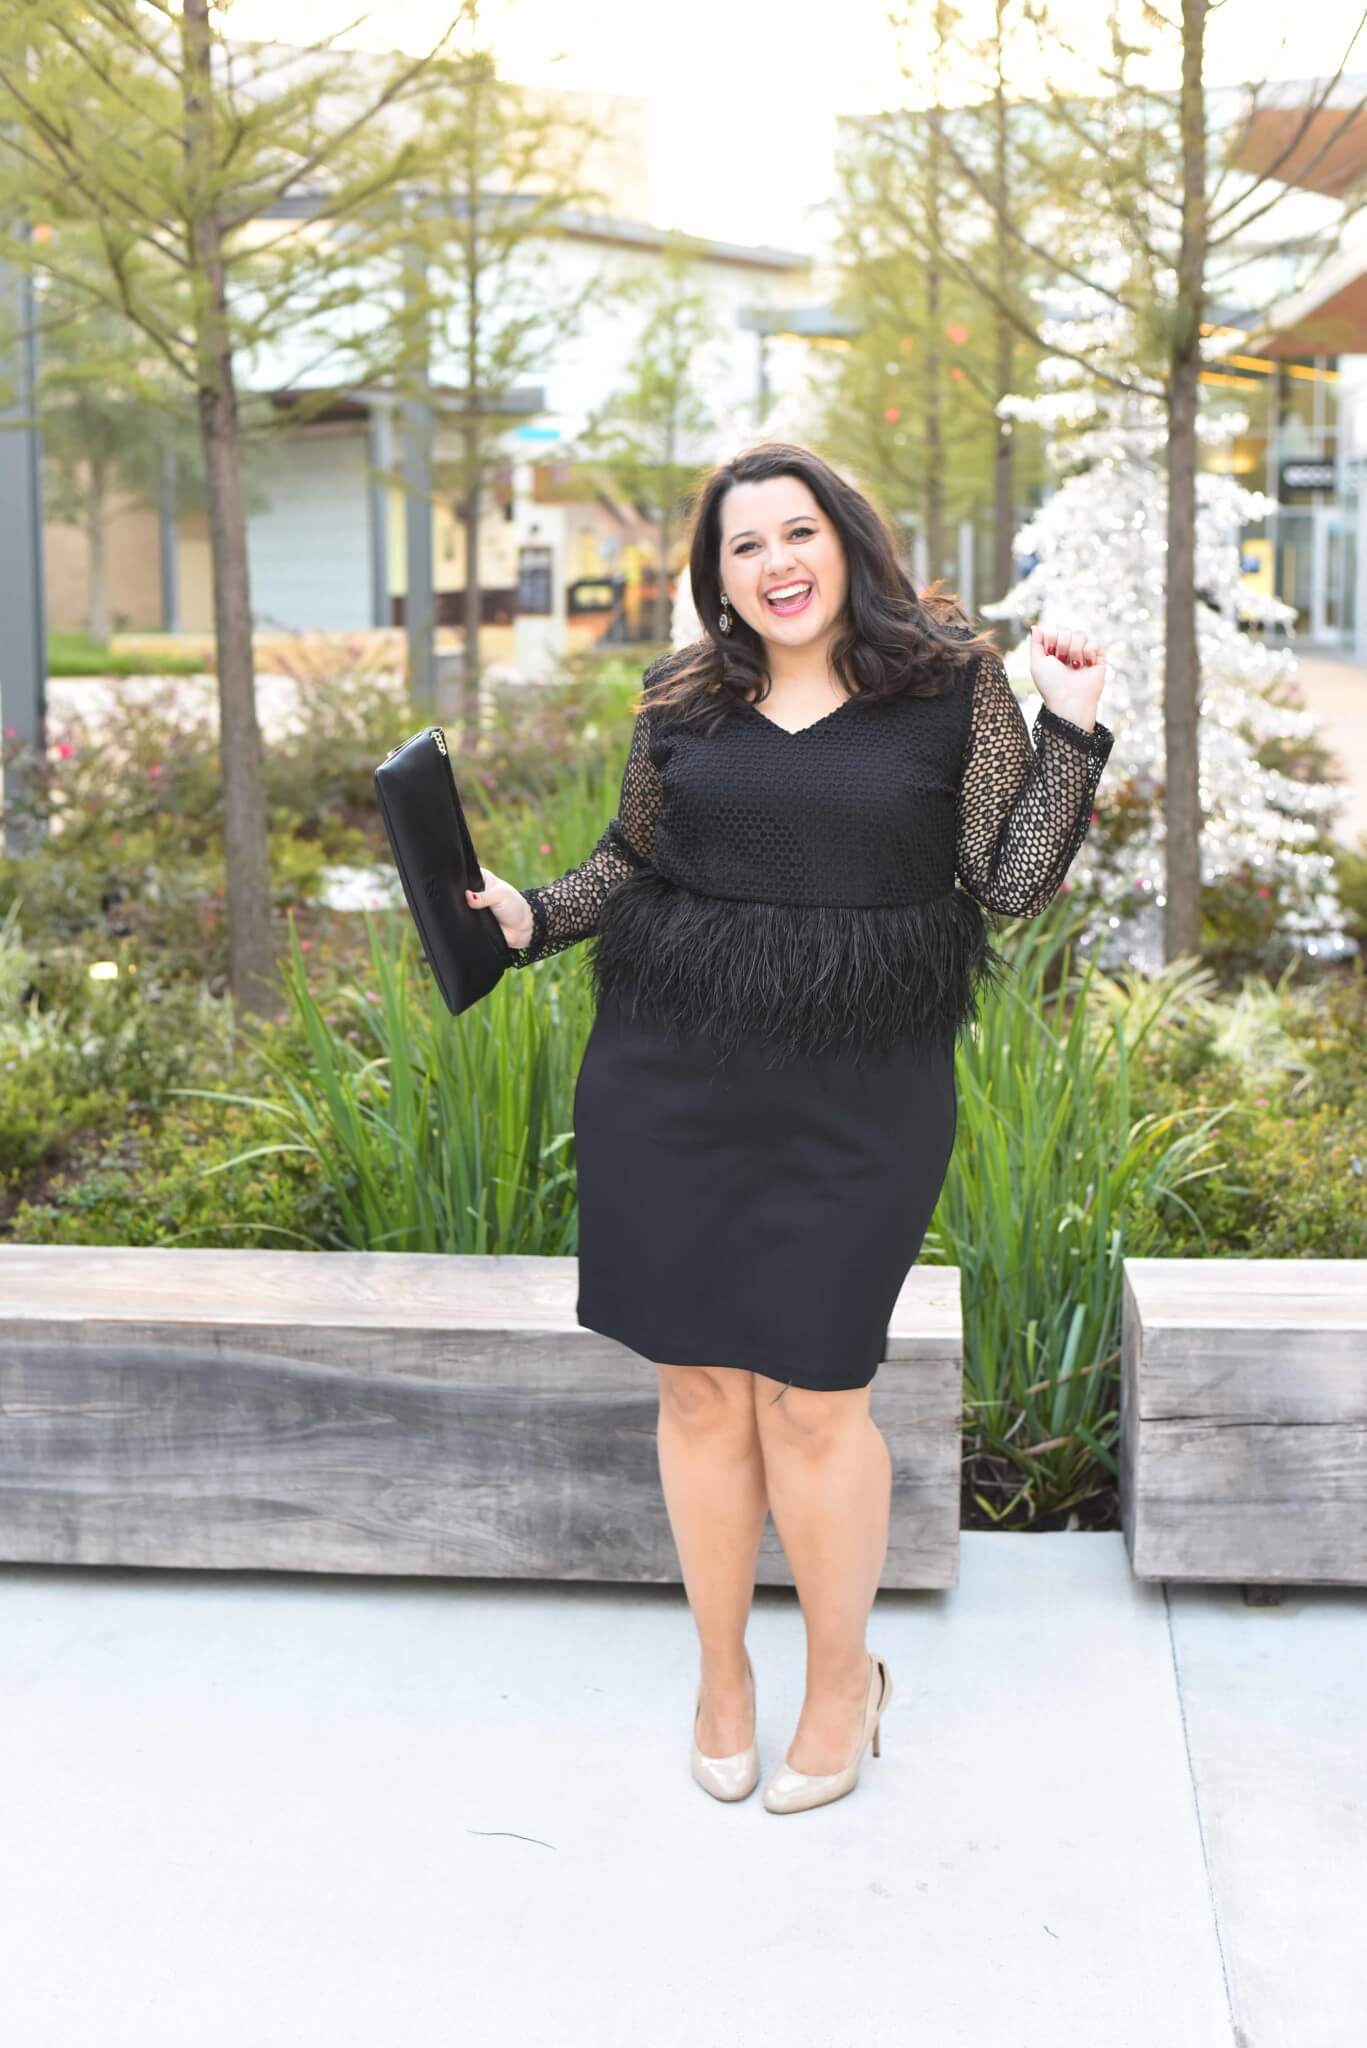 Emily from Something Gold, Something Blue is sharing her formal holiday party outfit including fabulous nude pumps, a gorgeous black lace and feather peplum dress and red crystal statement earrings. - @emilySGSB - About Emily, the woman behind popular Houston Curvy Fashion Blog, Something Gold, Something Blue